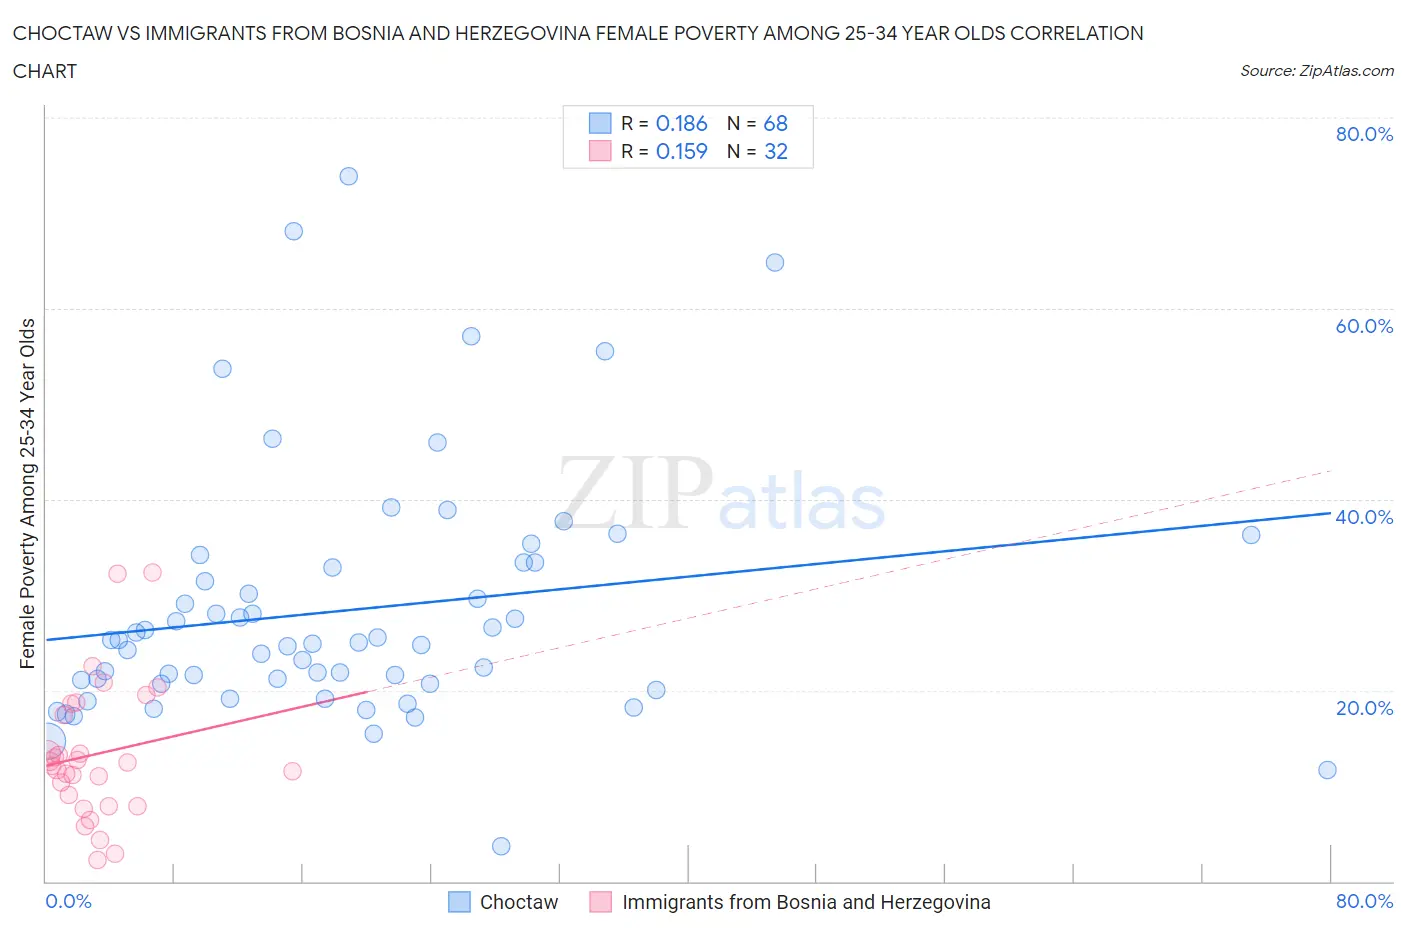 Choctaw vs Immigrants from Bosnia and Herzegovina Female Poverty Among 25-34 Year Olds